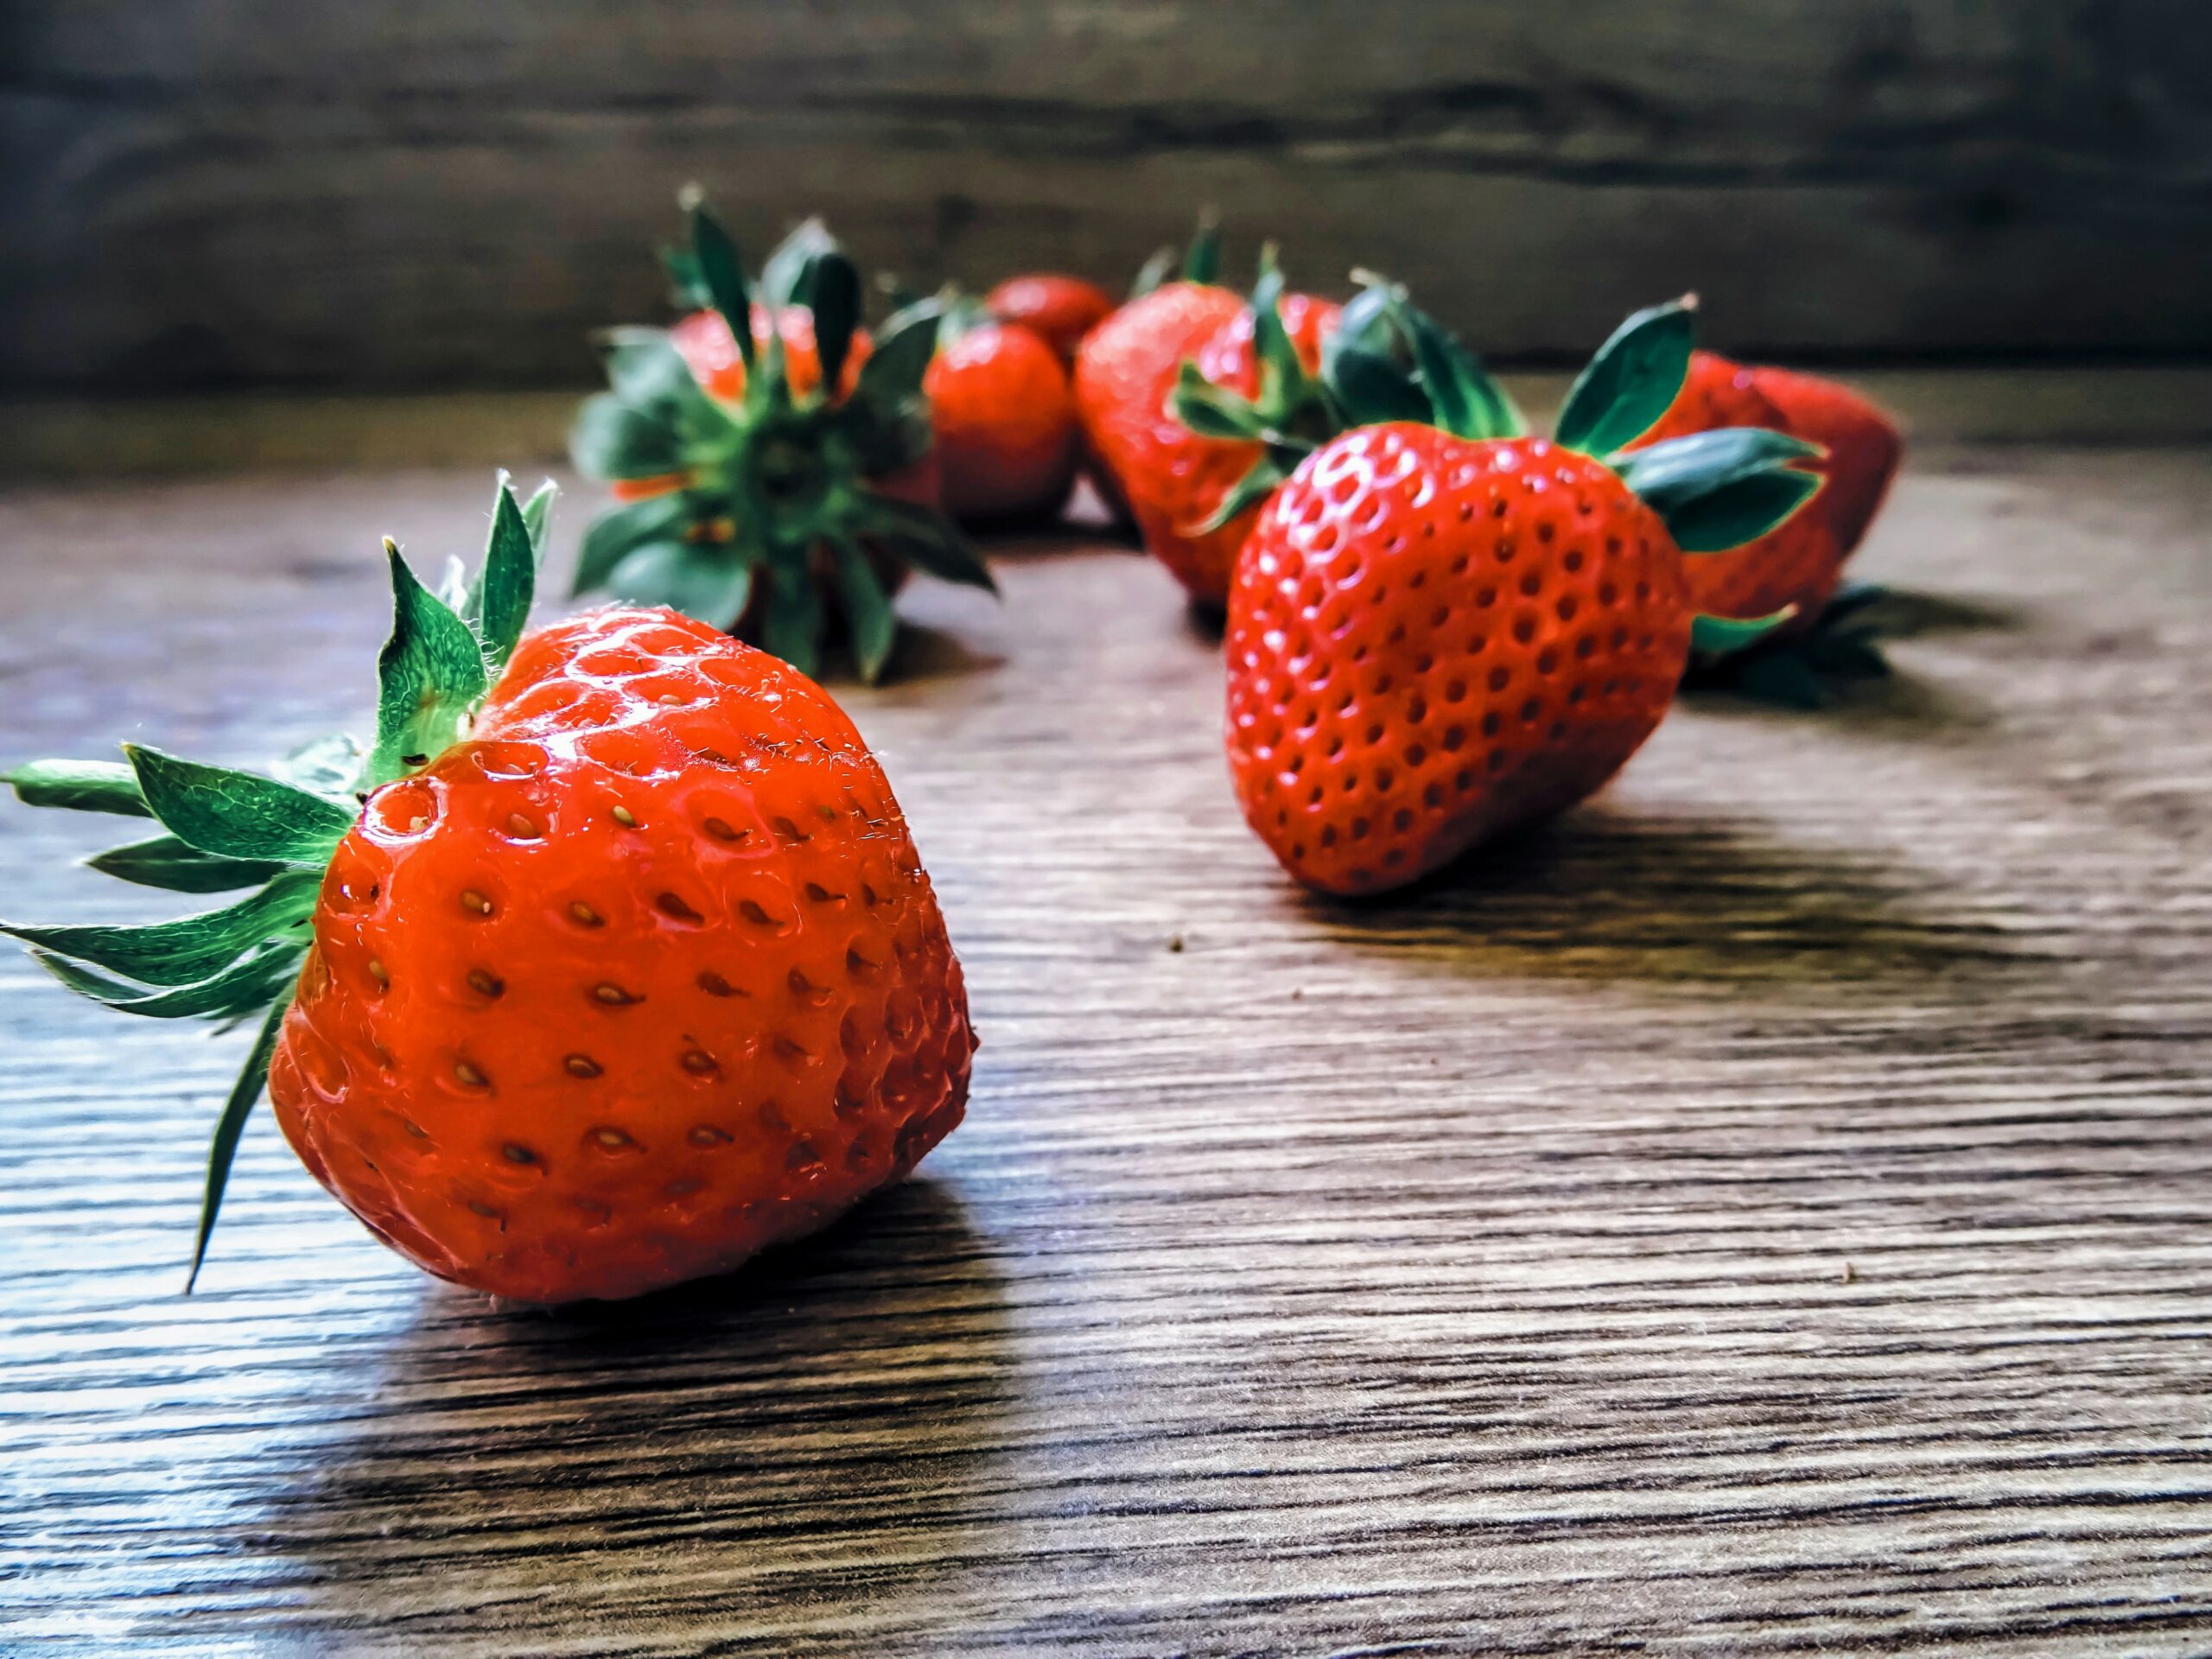 Benefits Of Adding Strawberry Seeds To Your Diet